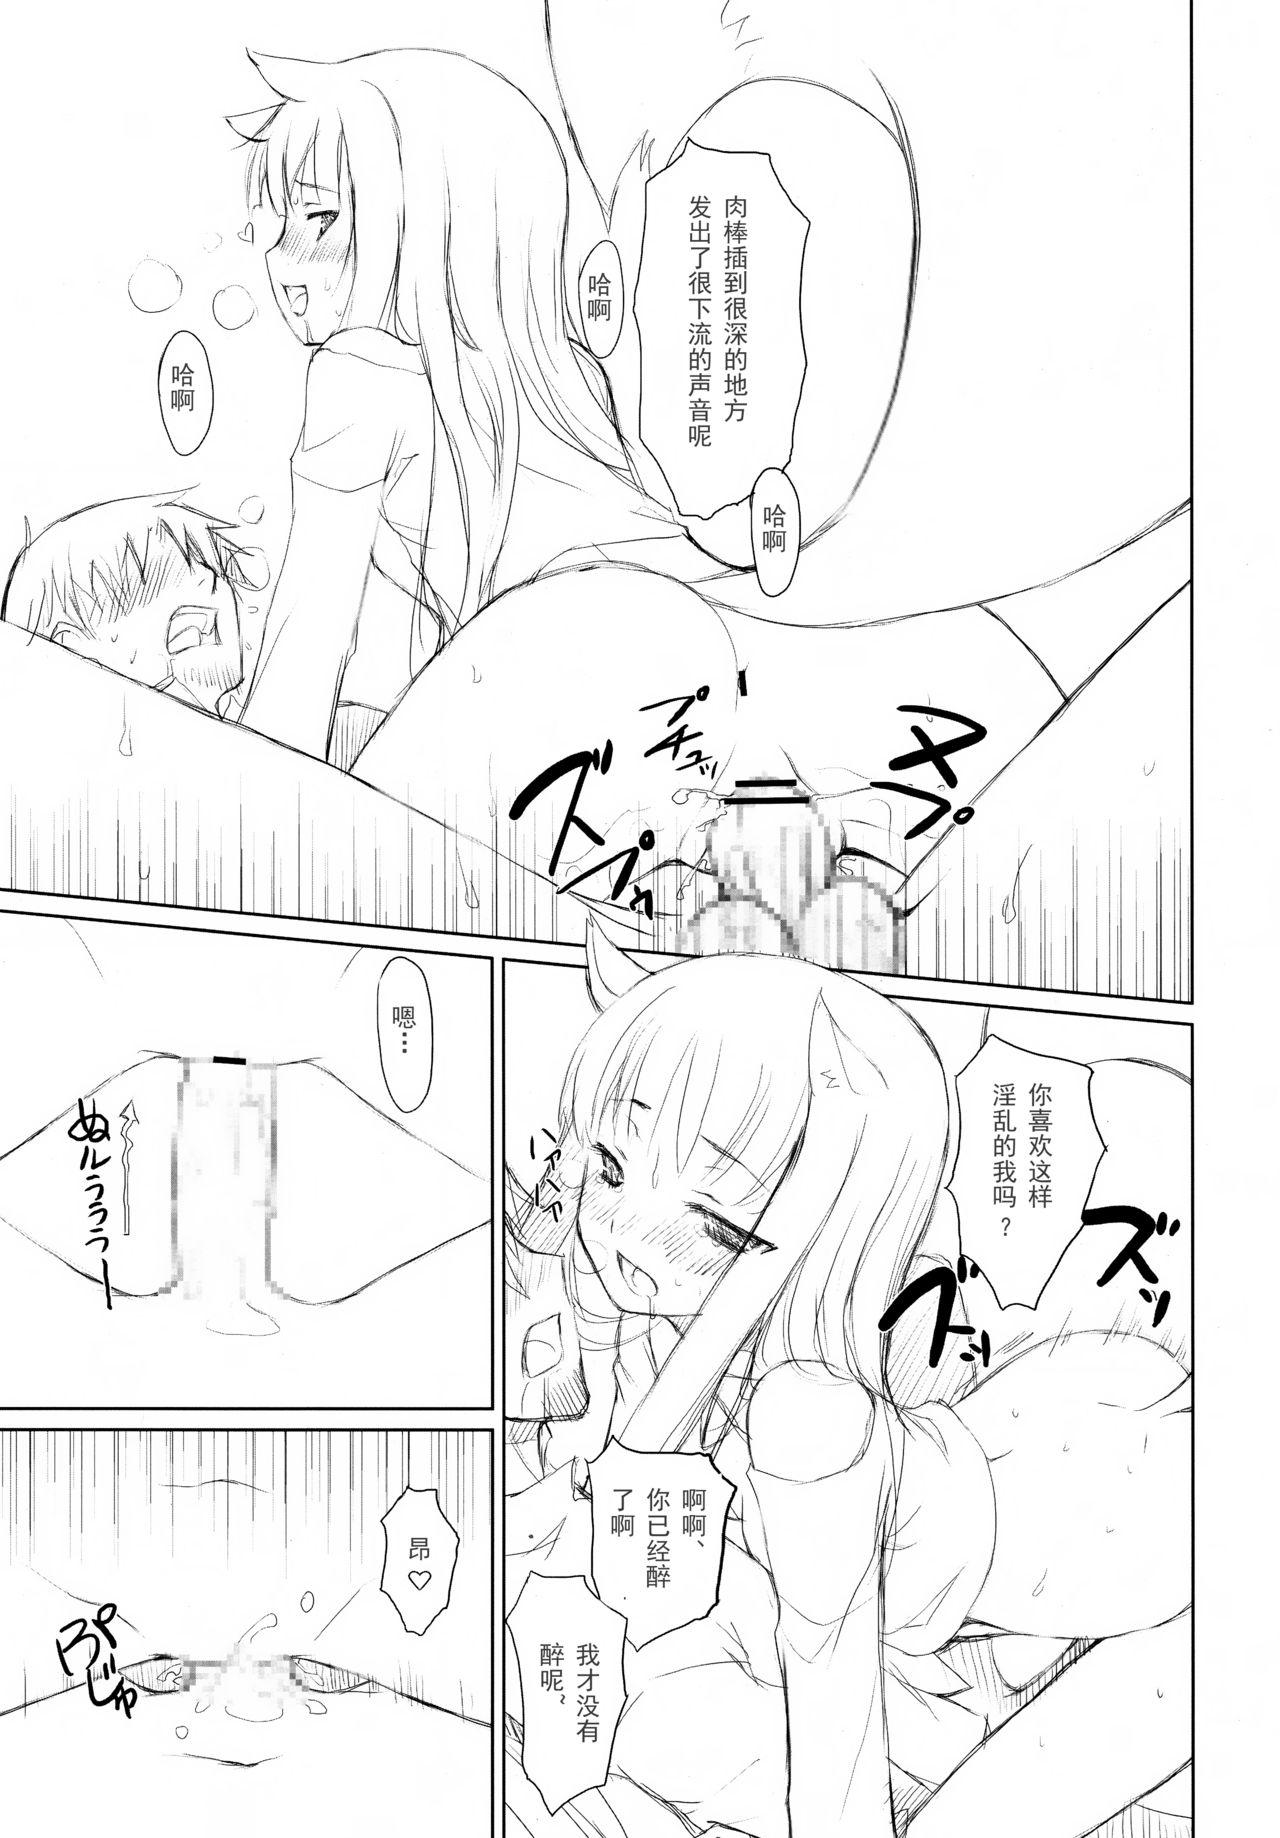 Peru Ookami to Gekishinryou - Spice and wolf Oldyoung - Page 12